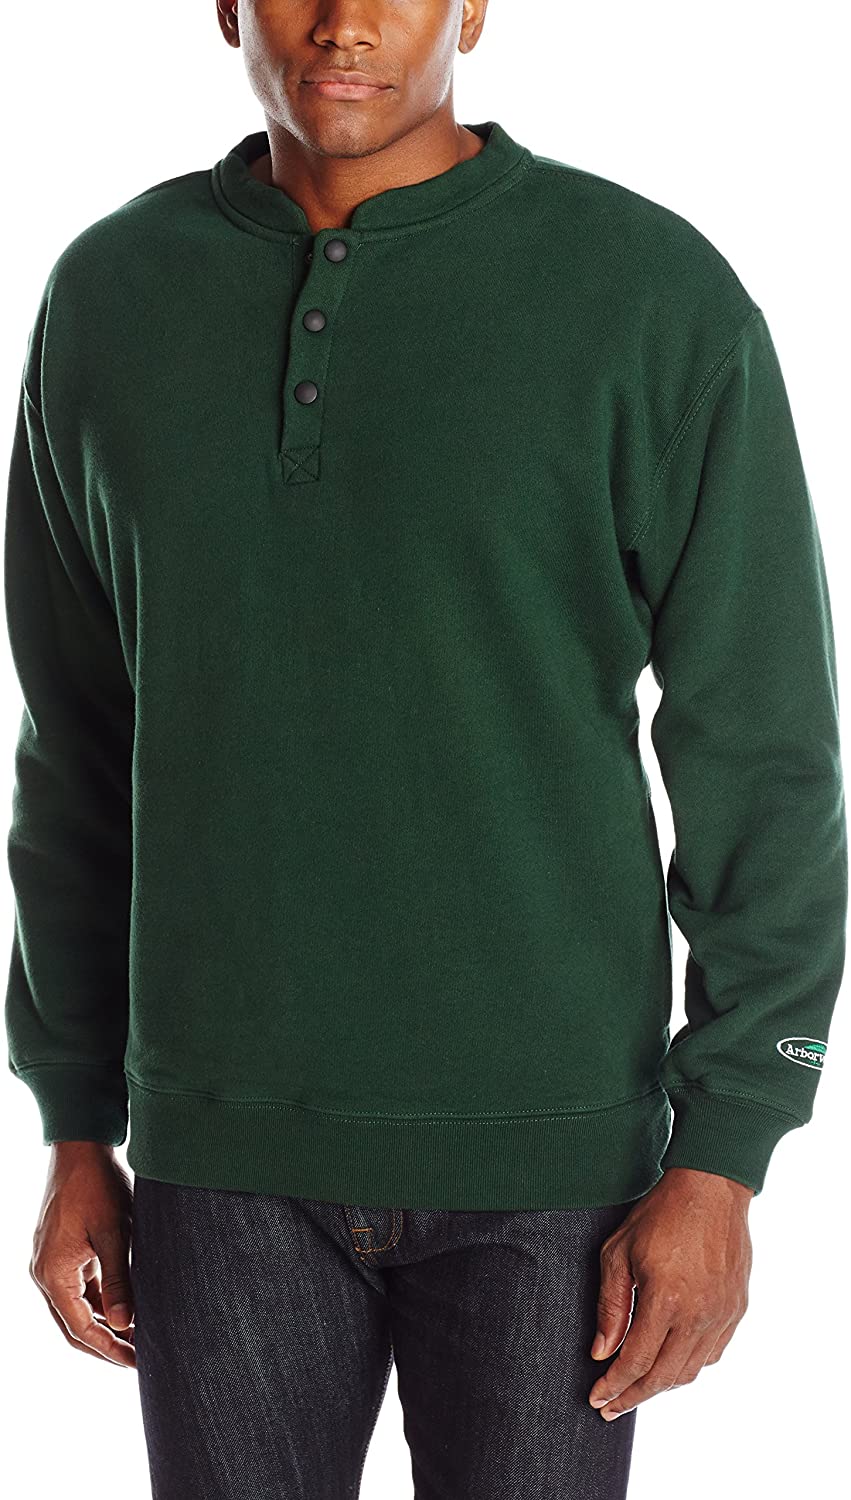 Arborwear Men's Double Thick Crew Sweatshirt in Forest Green from the from